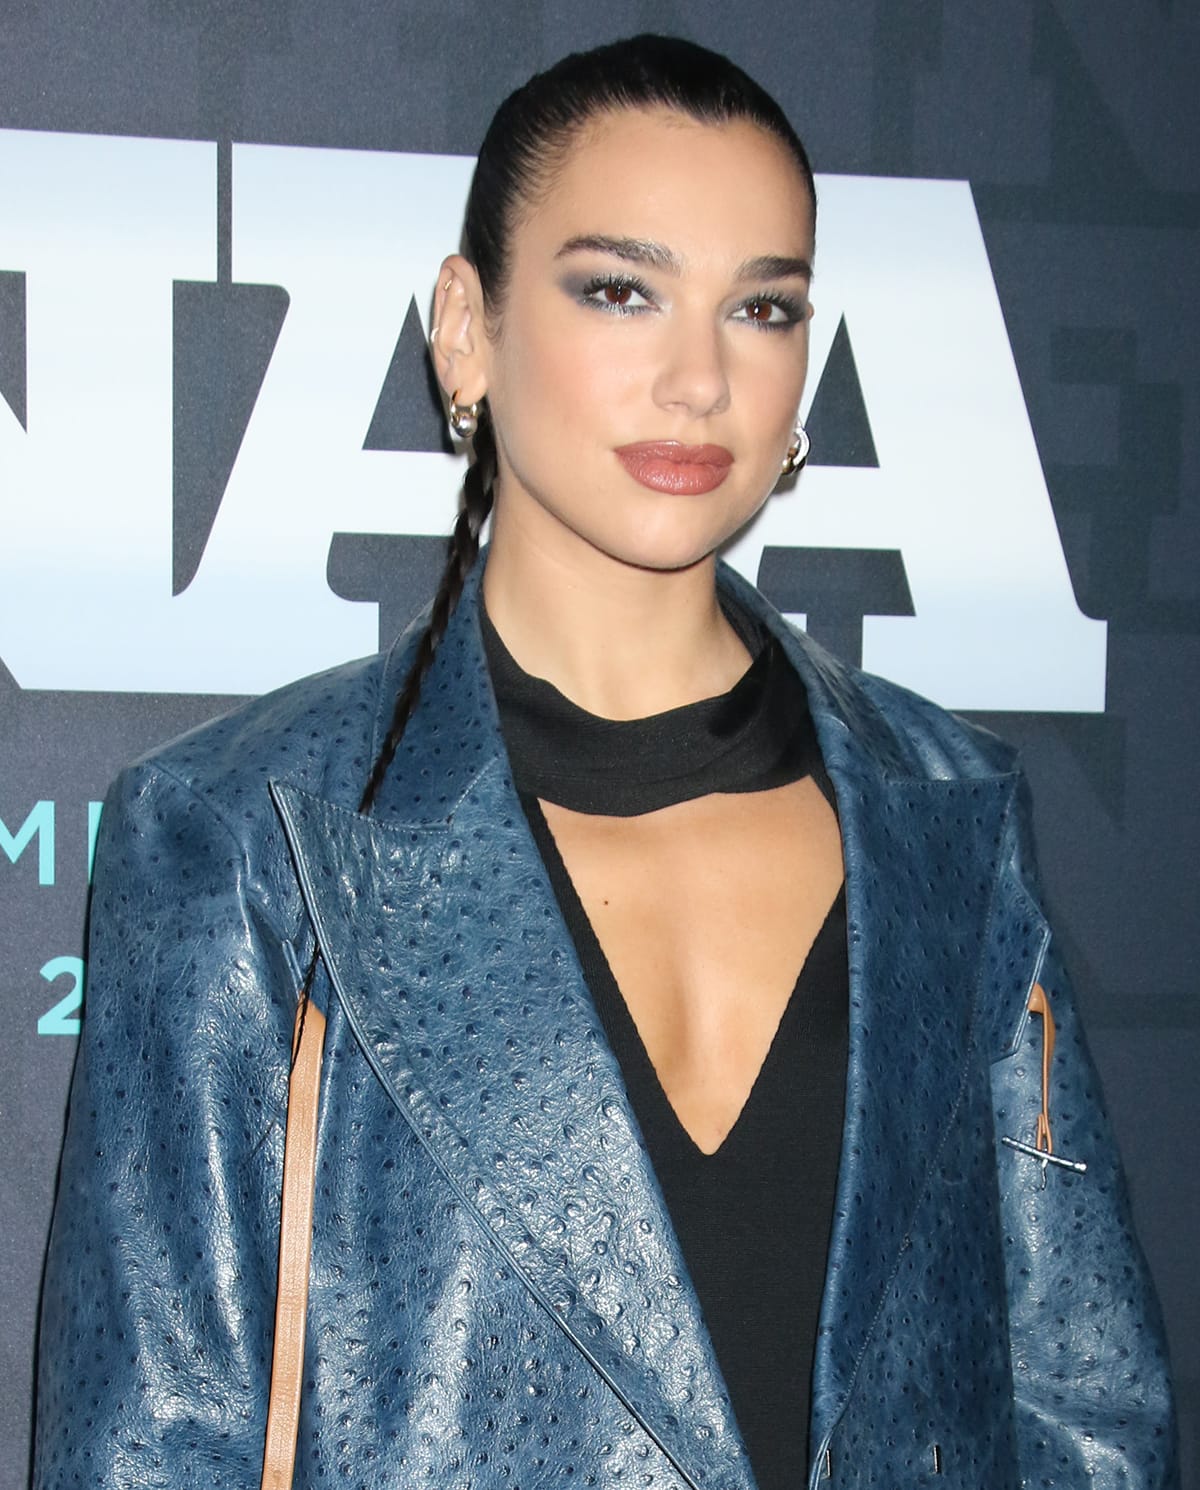 Dua Lipa pulls her raven hair back into a braided ponytail and wears glittery smokey eyeshadow that complements her coat